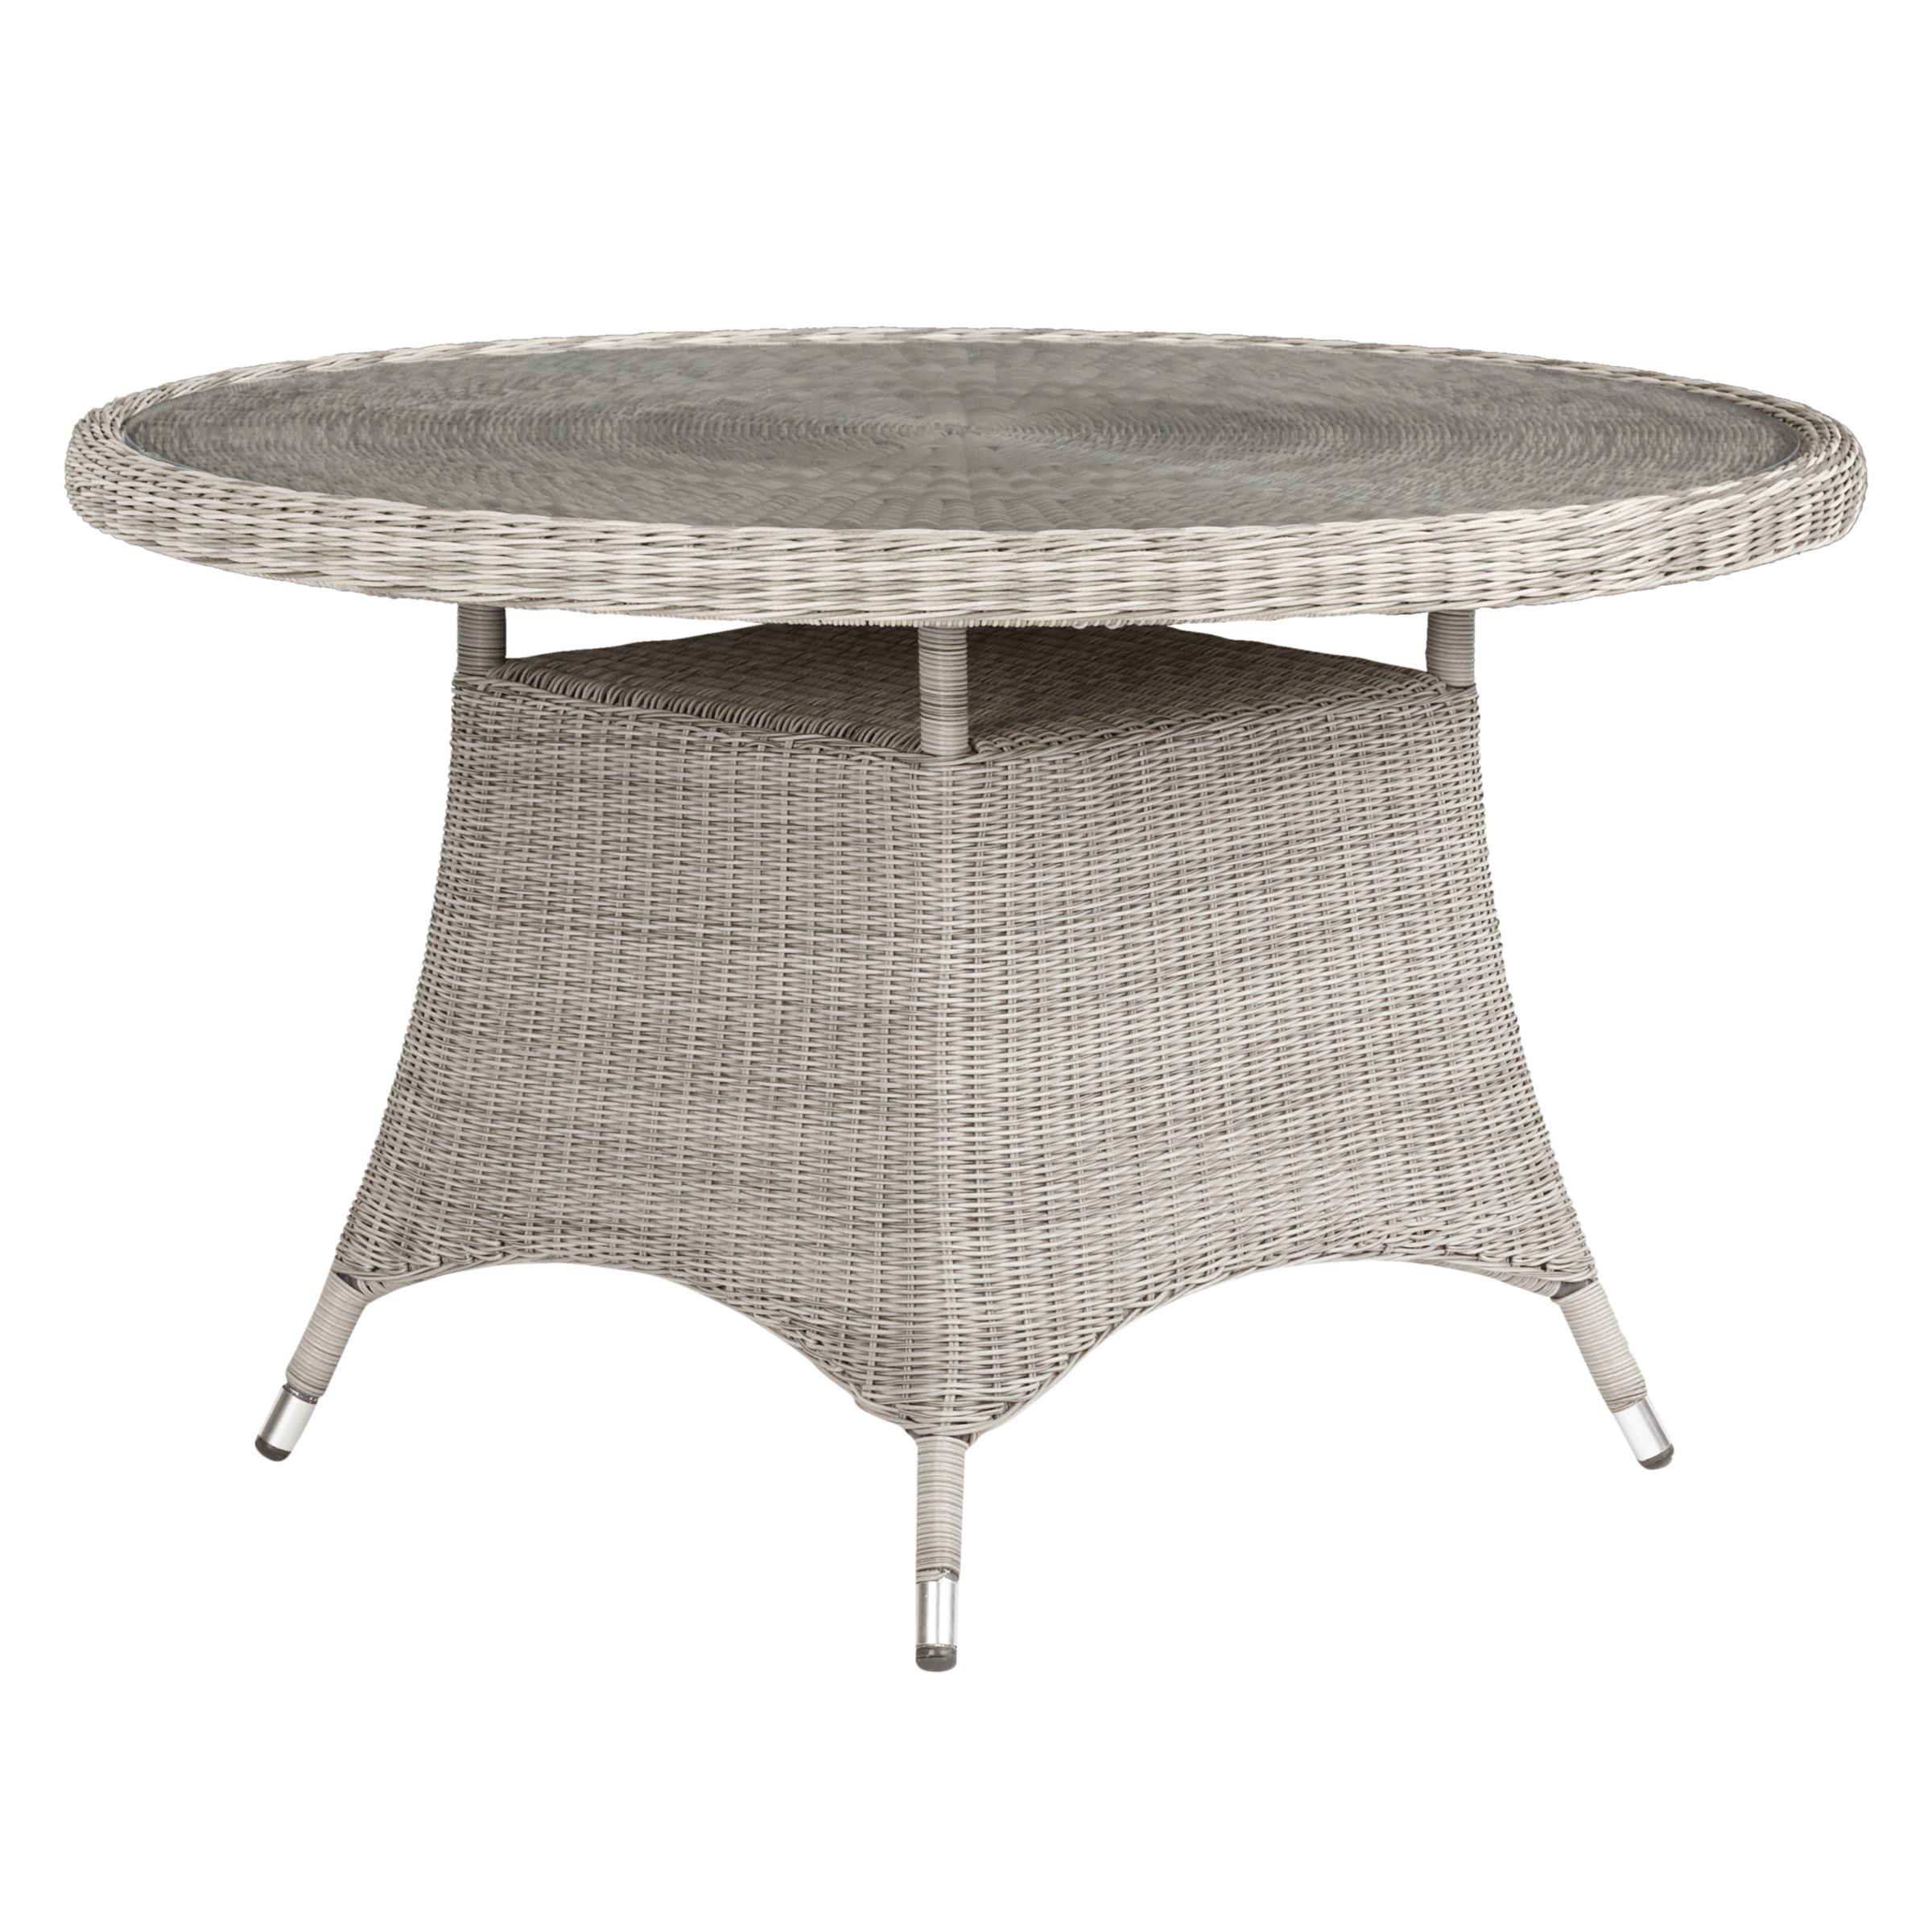 John Lewis Dante 4 Seater Outdoor Dining Table